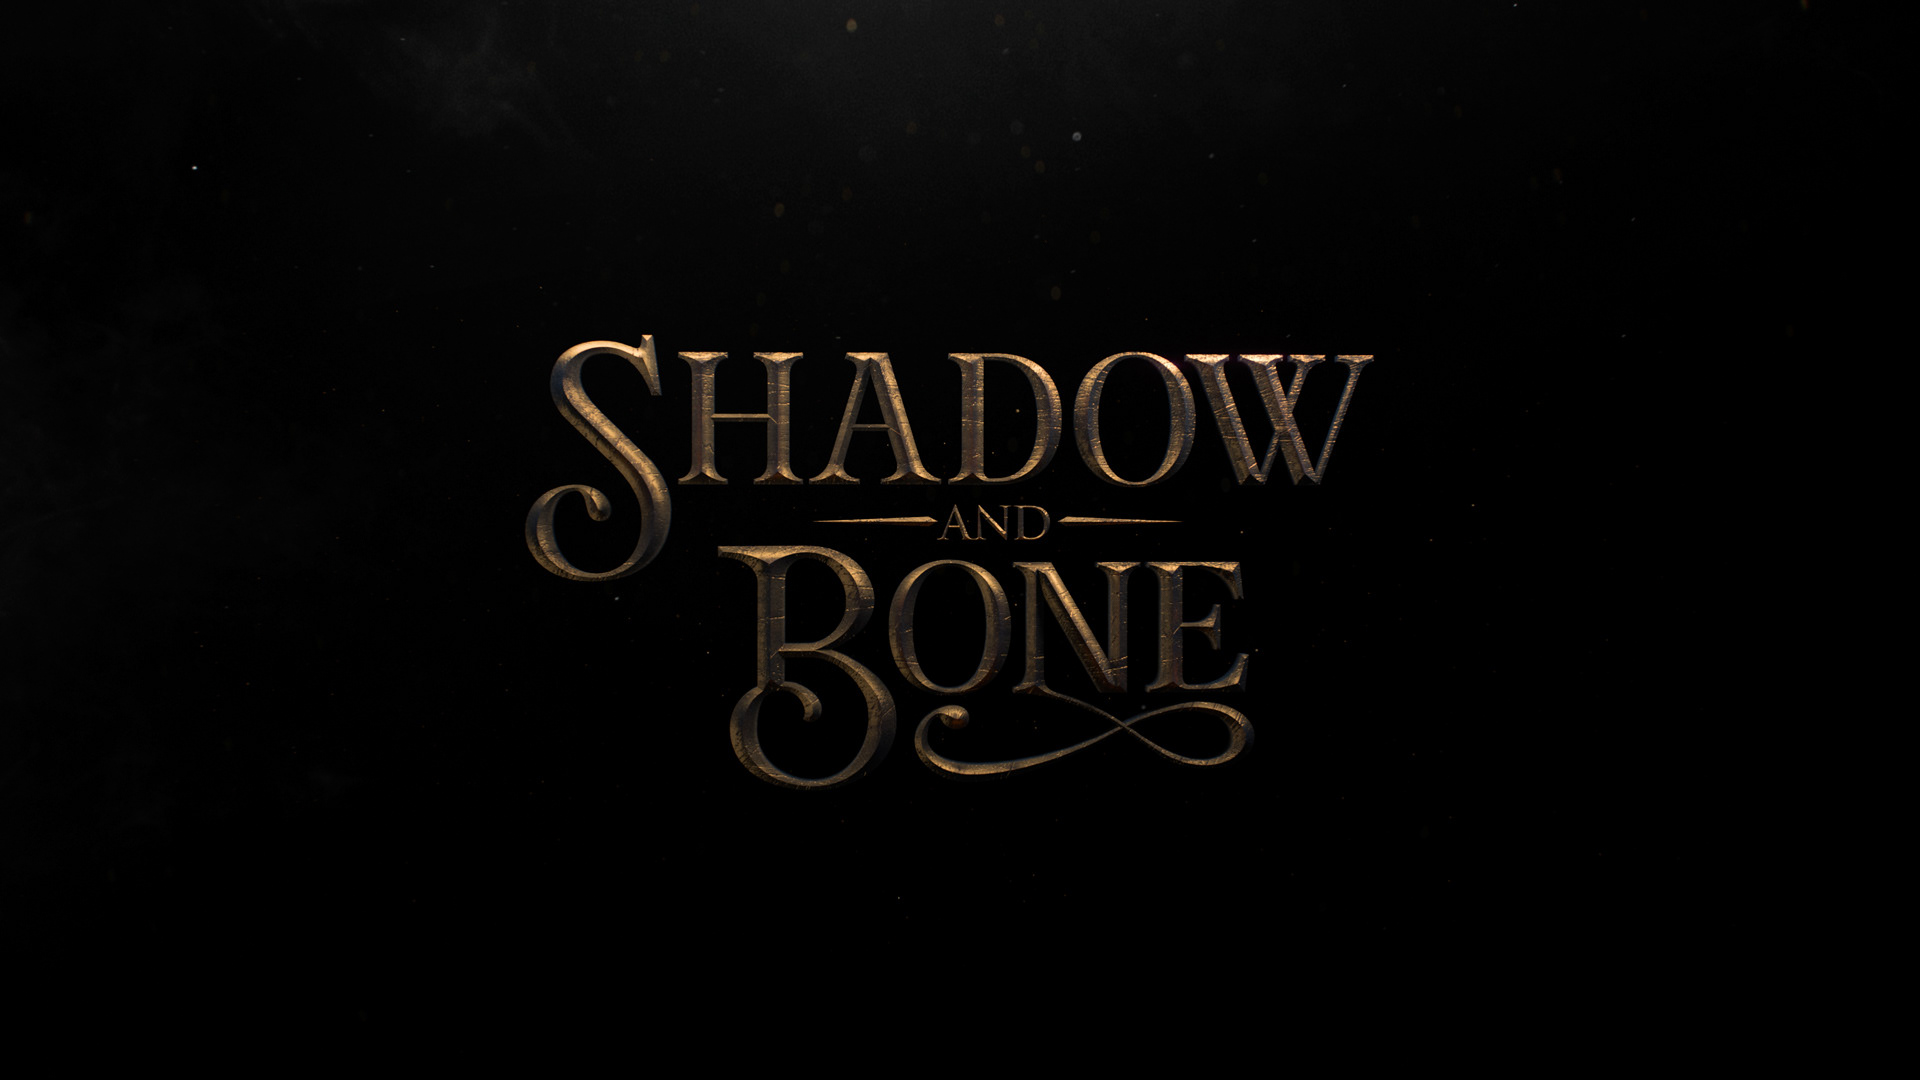 HD wallpaper featuring the elegant golden logo of Shadow and Bone on a dark, textured background for desktop.